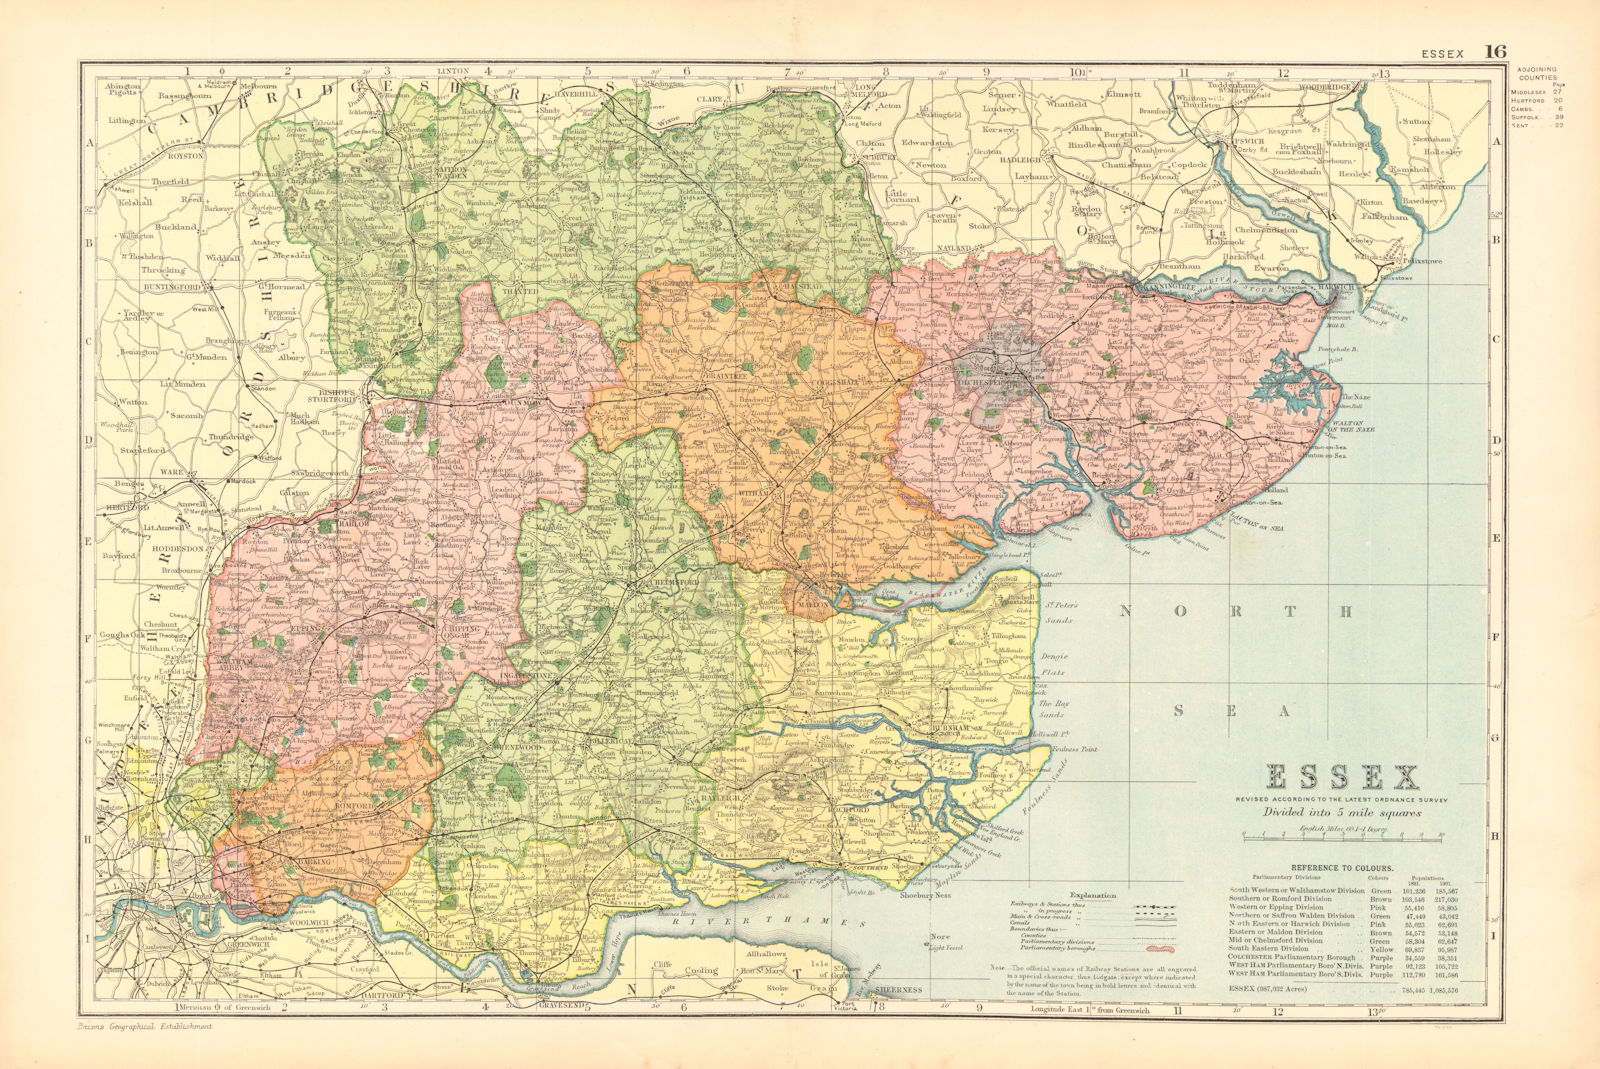 ESSEX. Showing Parliamentary divisions, boroughs & parks. BACON 1904 old map